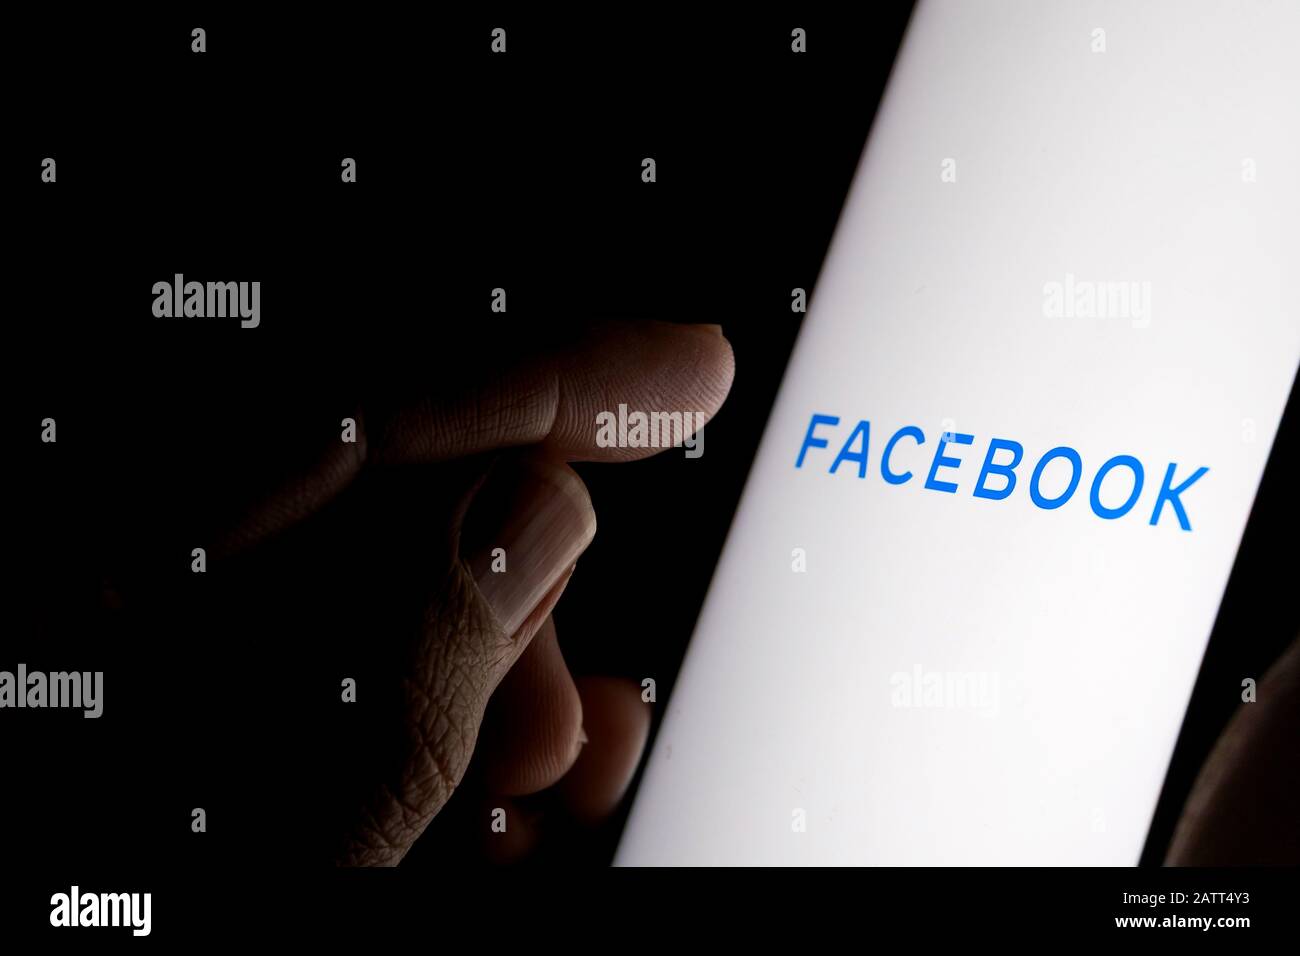 New Facebook company logo on the dark screen and finger pointing to it. Conceptual photo. Stock Photo